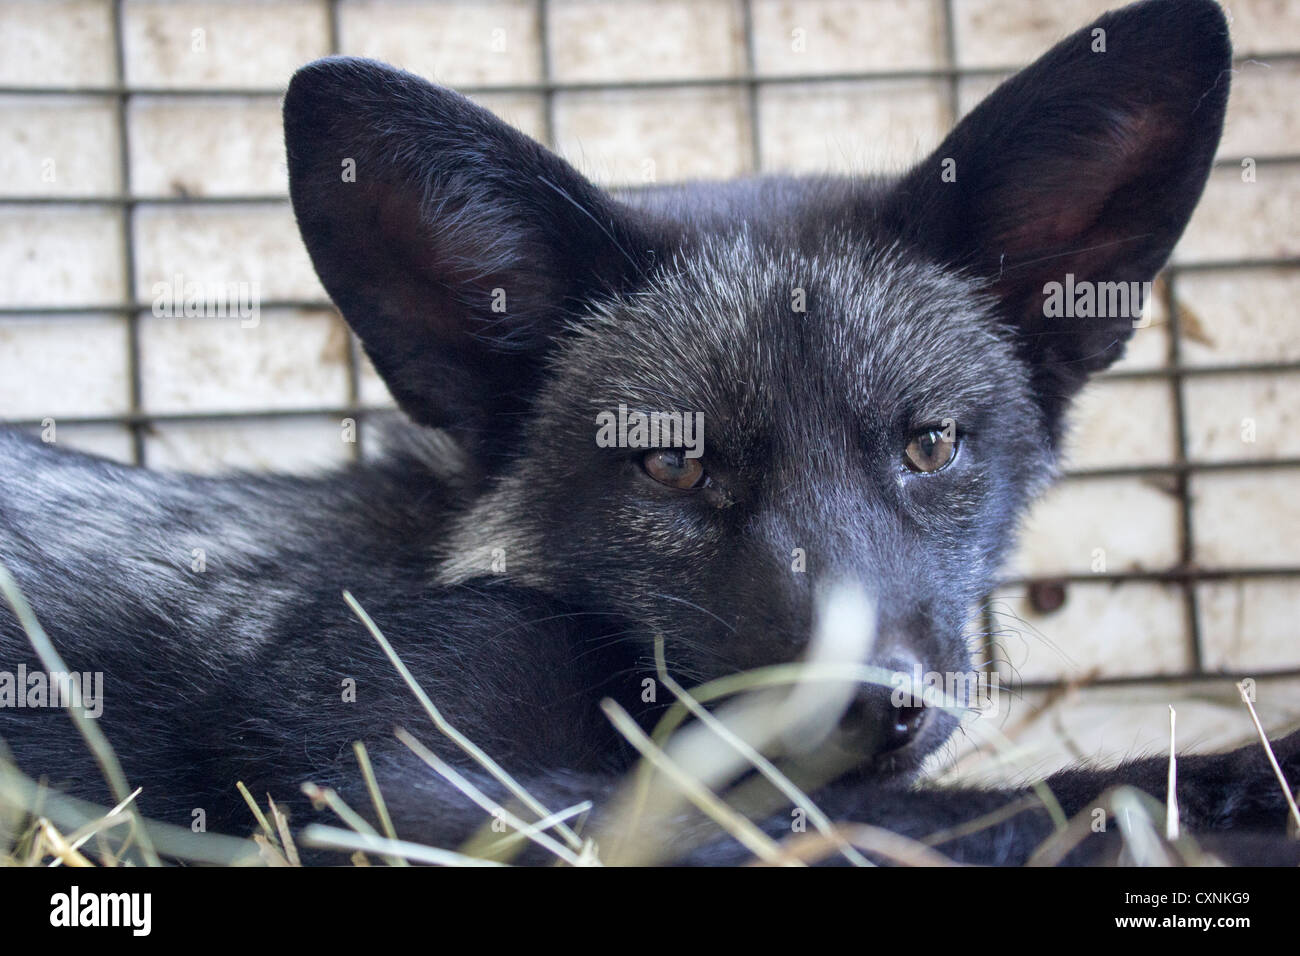 Black baby fox in a animal shelter cage being taken care off. Looking straight at the camera. Stock Photo